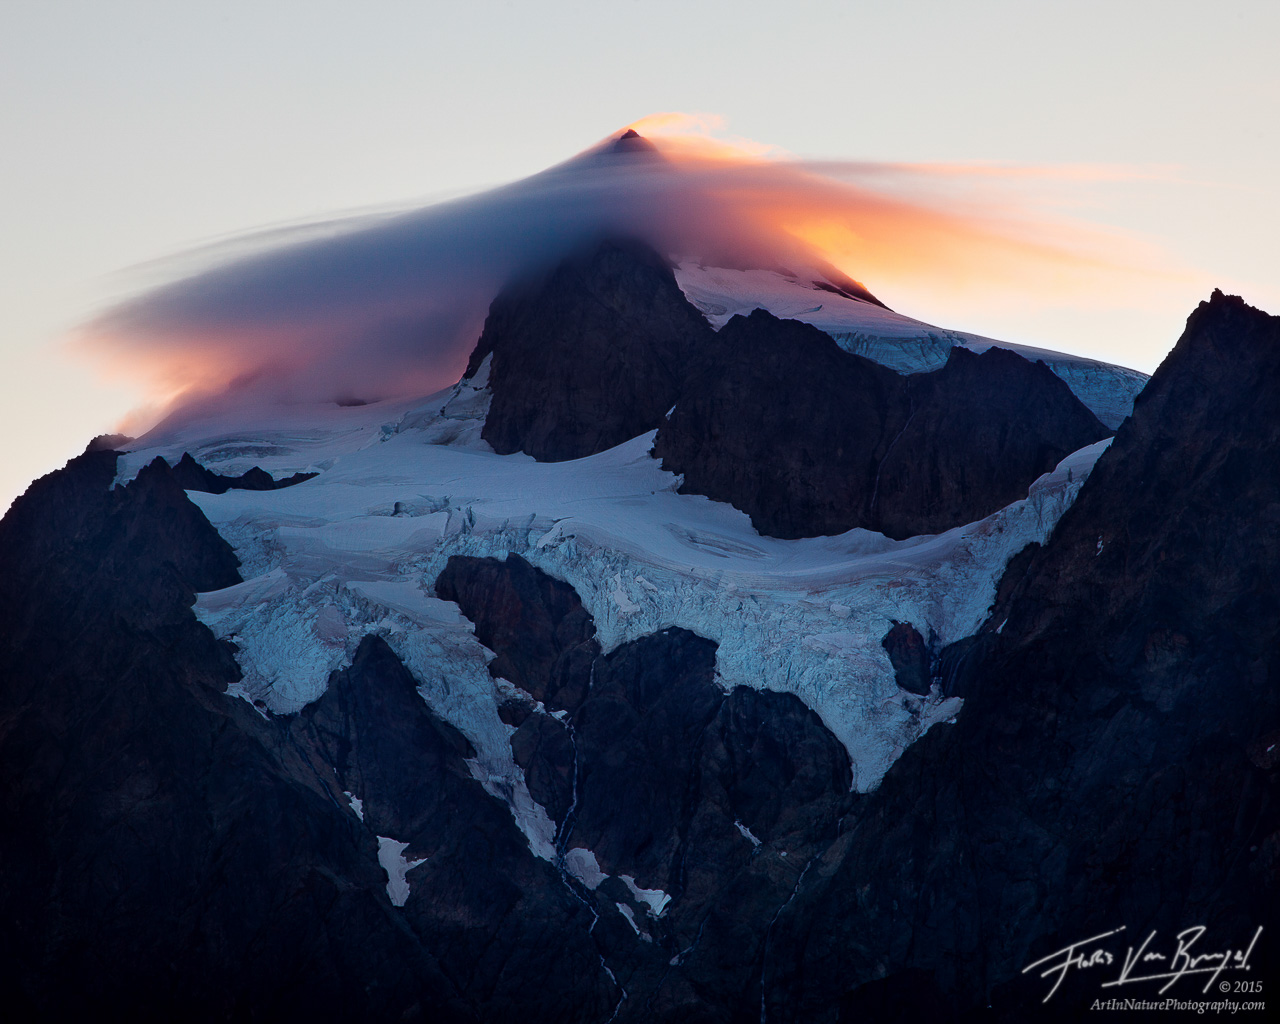 A lenticular cloud forms over the summit of Mt Shuksan in Washington's North Cascades.